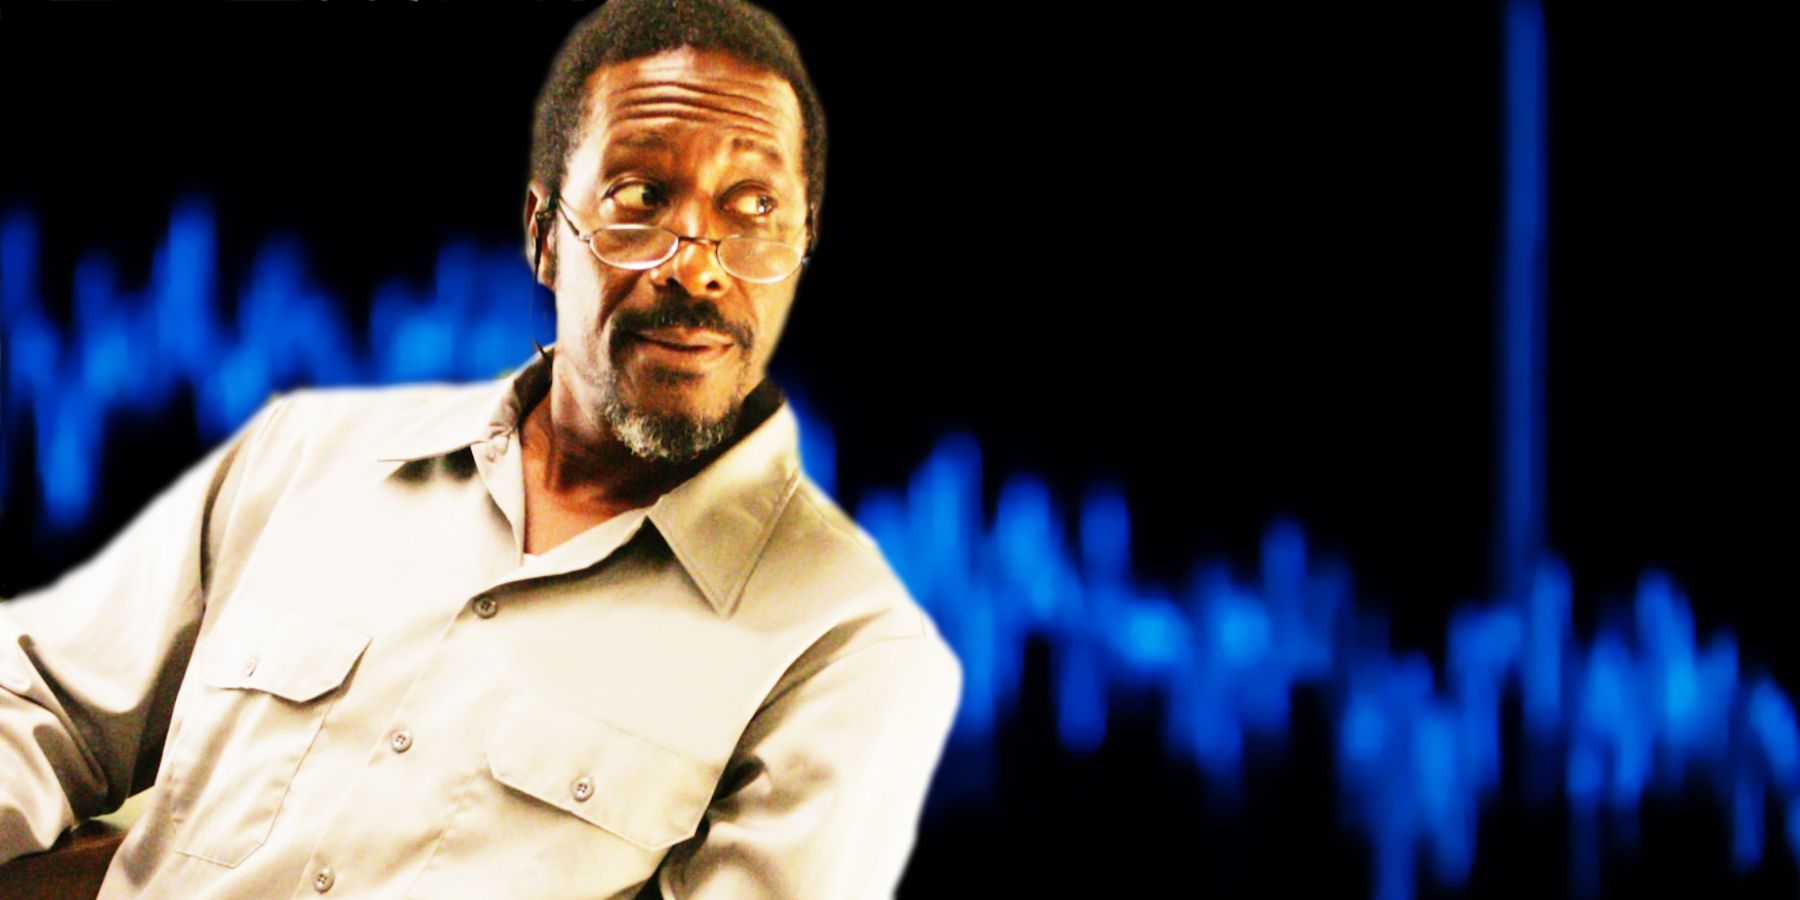 Clarke Peters as Lester Freamon and The Wire's low ratings